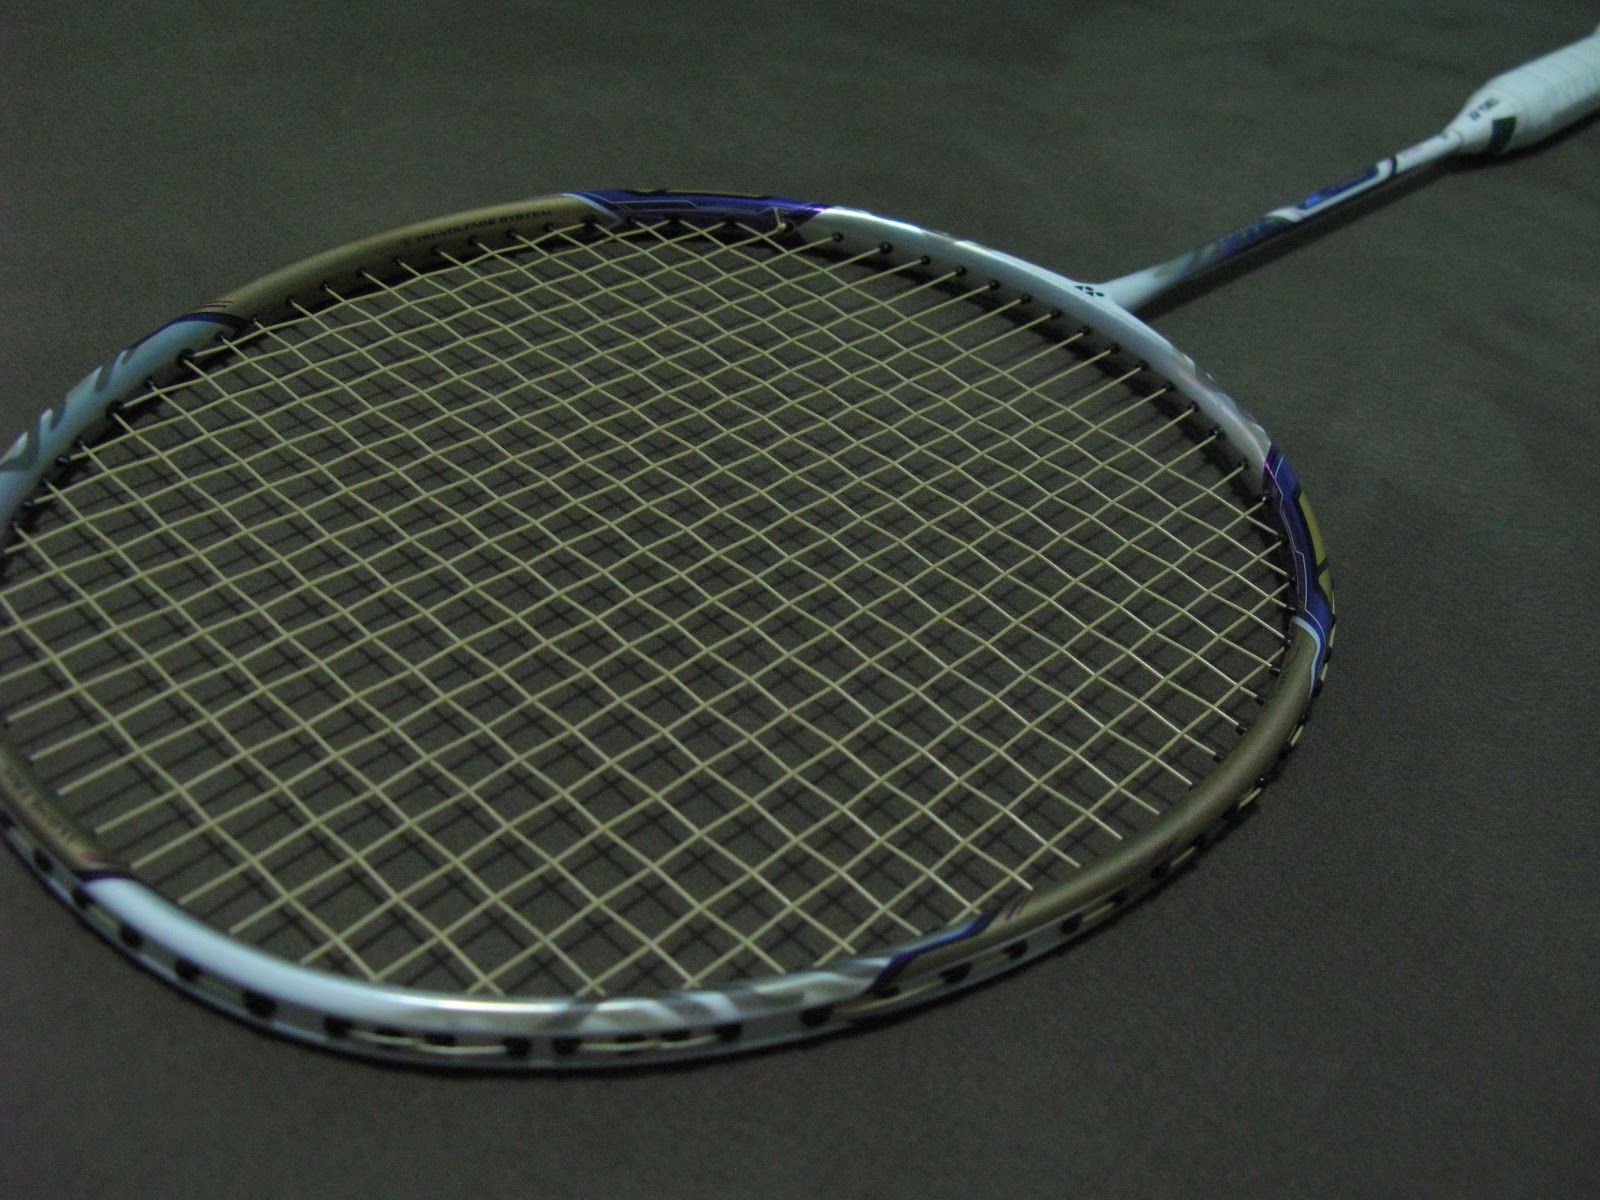 Of badminton things: New Badminton Racket Launch: Yonex Voltric Z-Force ...